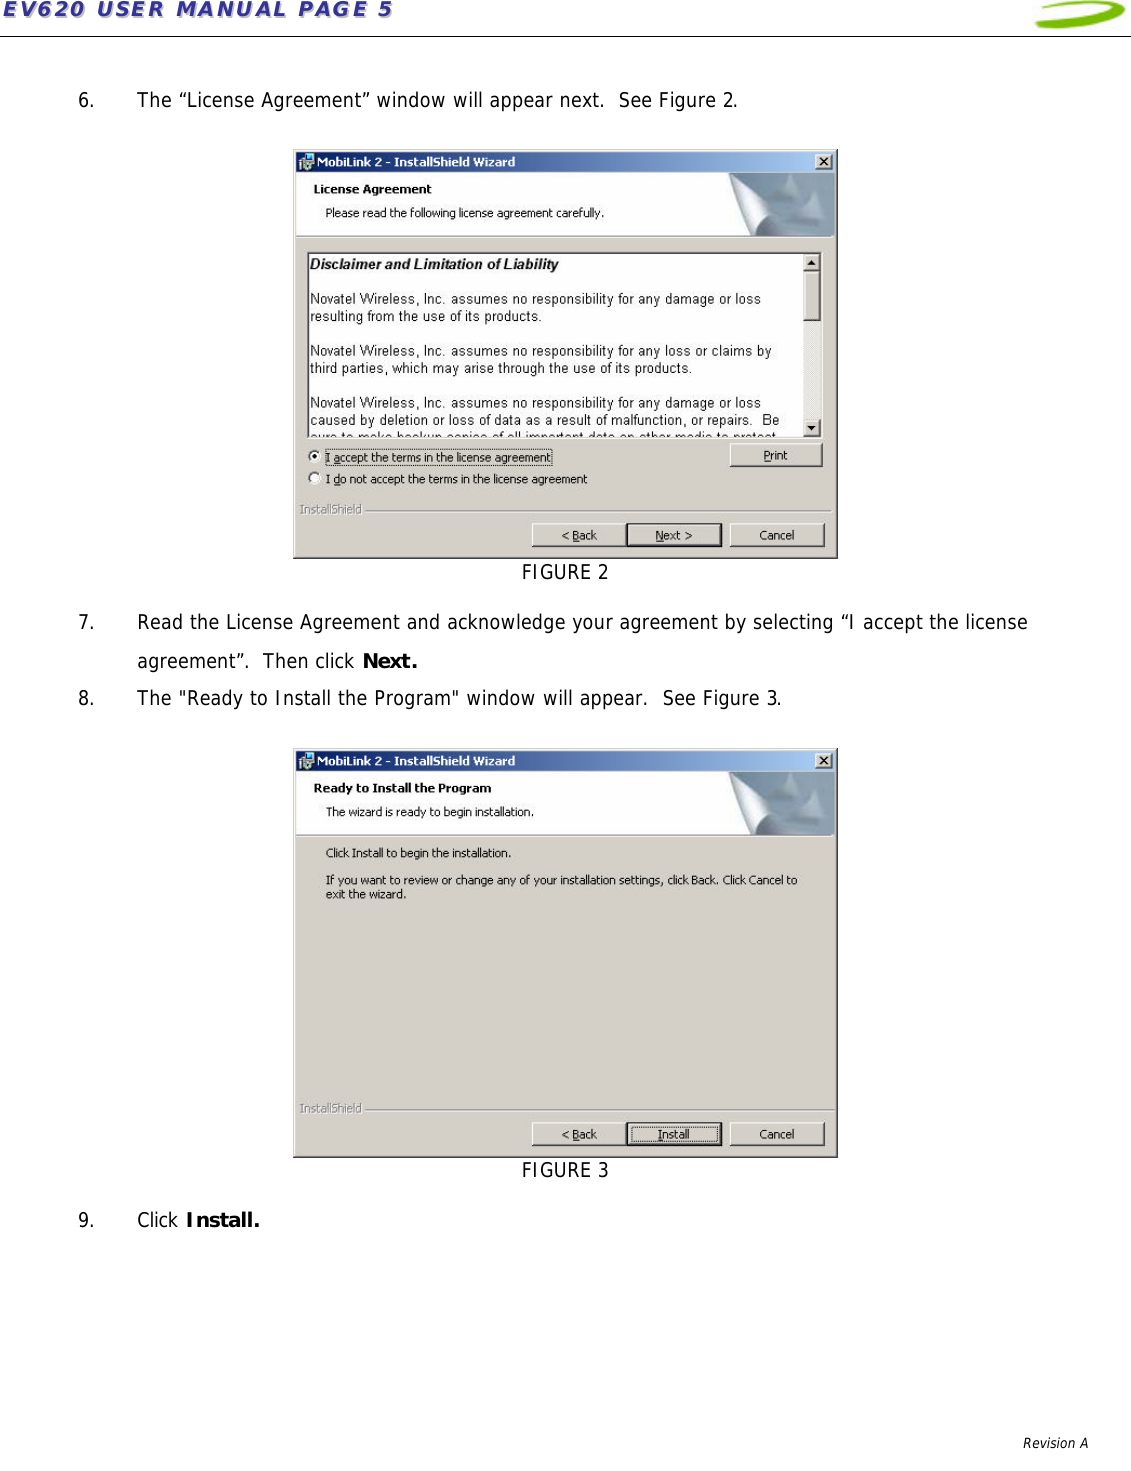 EEVV662200  UUSSEERR  MMAANNUUAALL  PPAAGGEE  55              Revision A     6. The “License Agreement” window will appear next.  See Figure 2.   FIGURE 2  7. Read the License Agreement and acknowledge your agreement by selecting “I accept the license agreement”.  Then click Next. 8. The &quot;Ready to Install the Program&quot; window will appear.  See Figure 3.   FIGURE 3  9. Click Install.  